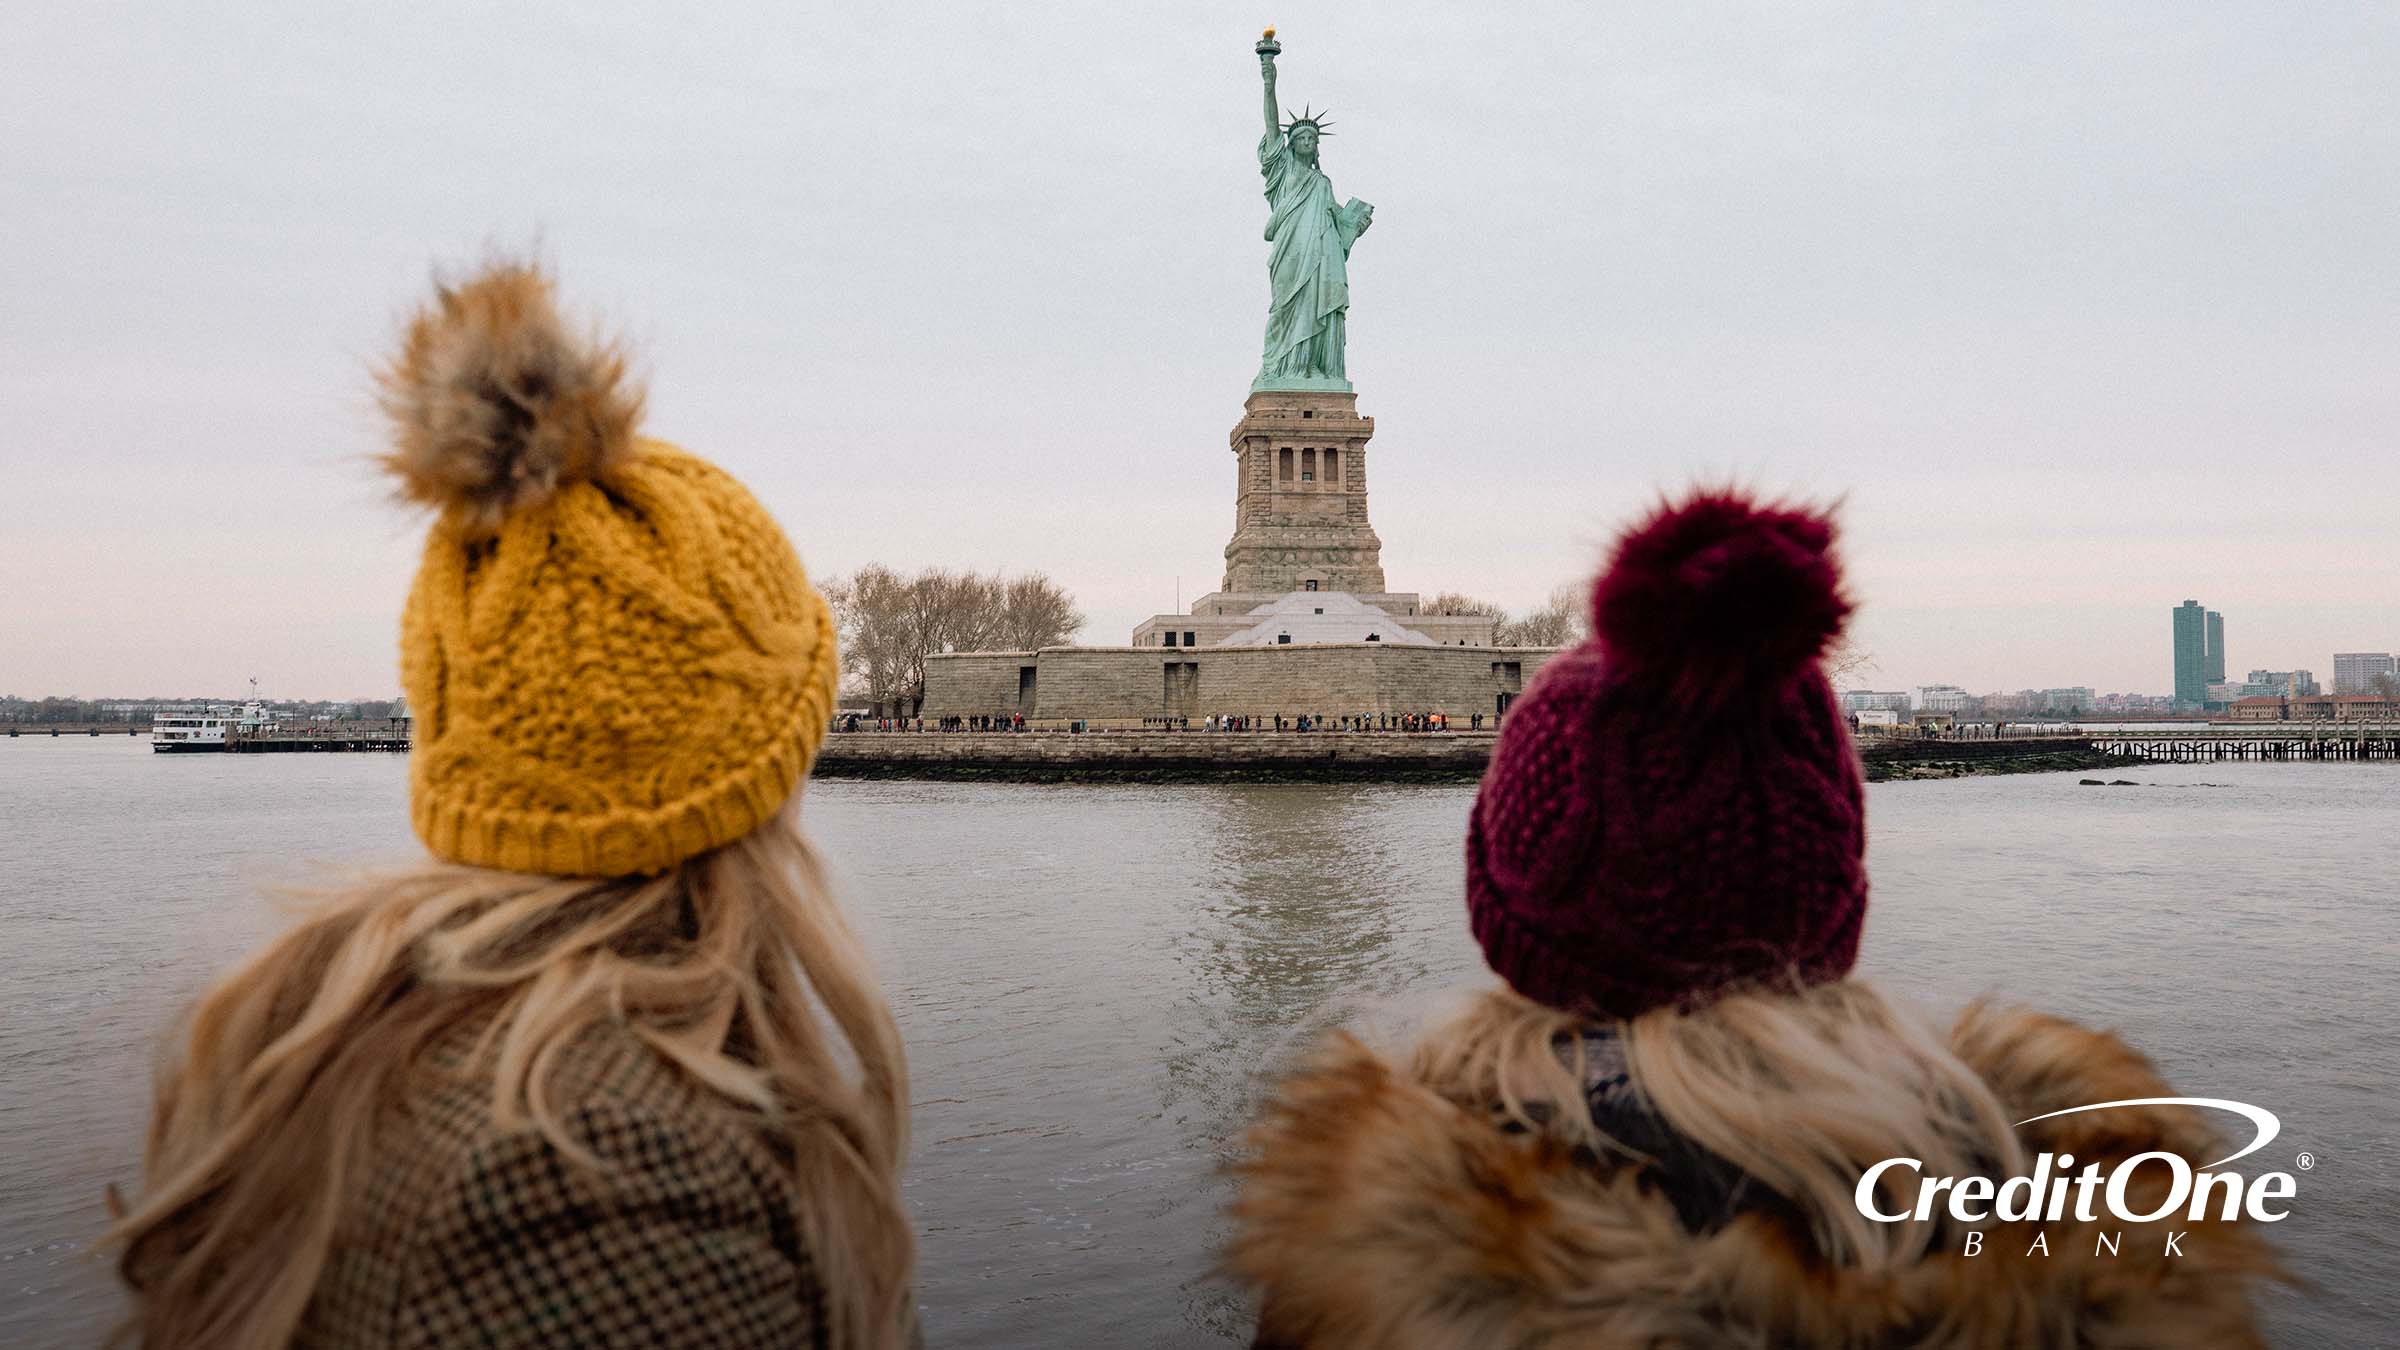 Tourists view the Statue of Liberty from the ferry on a budget travel vacation